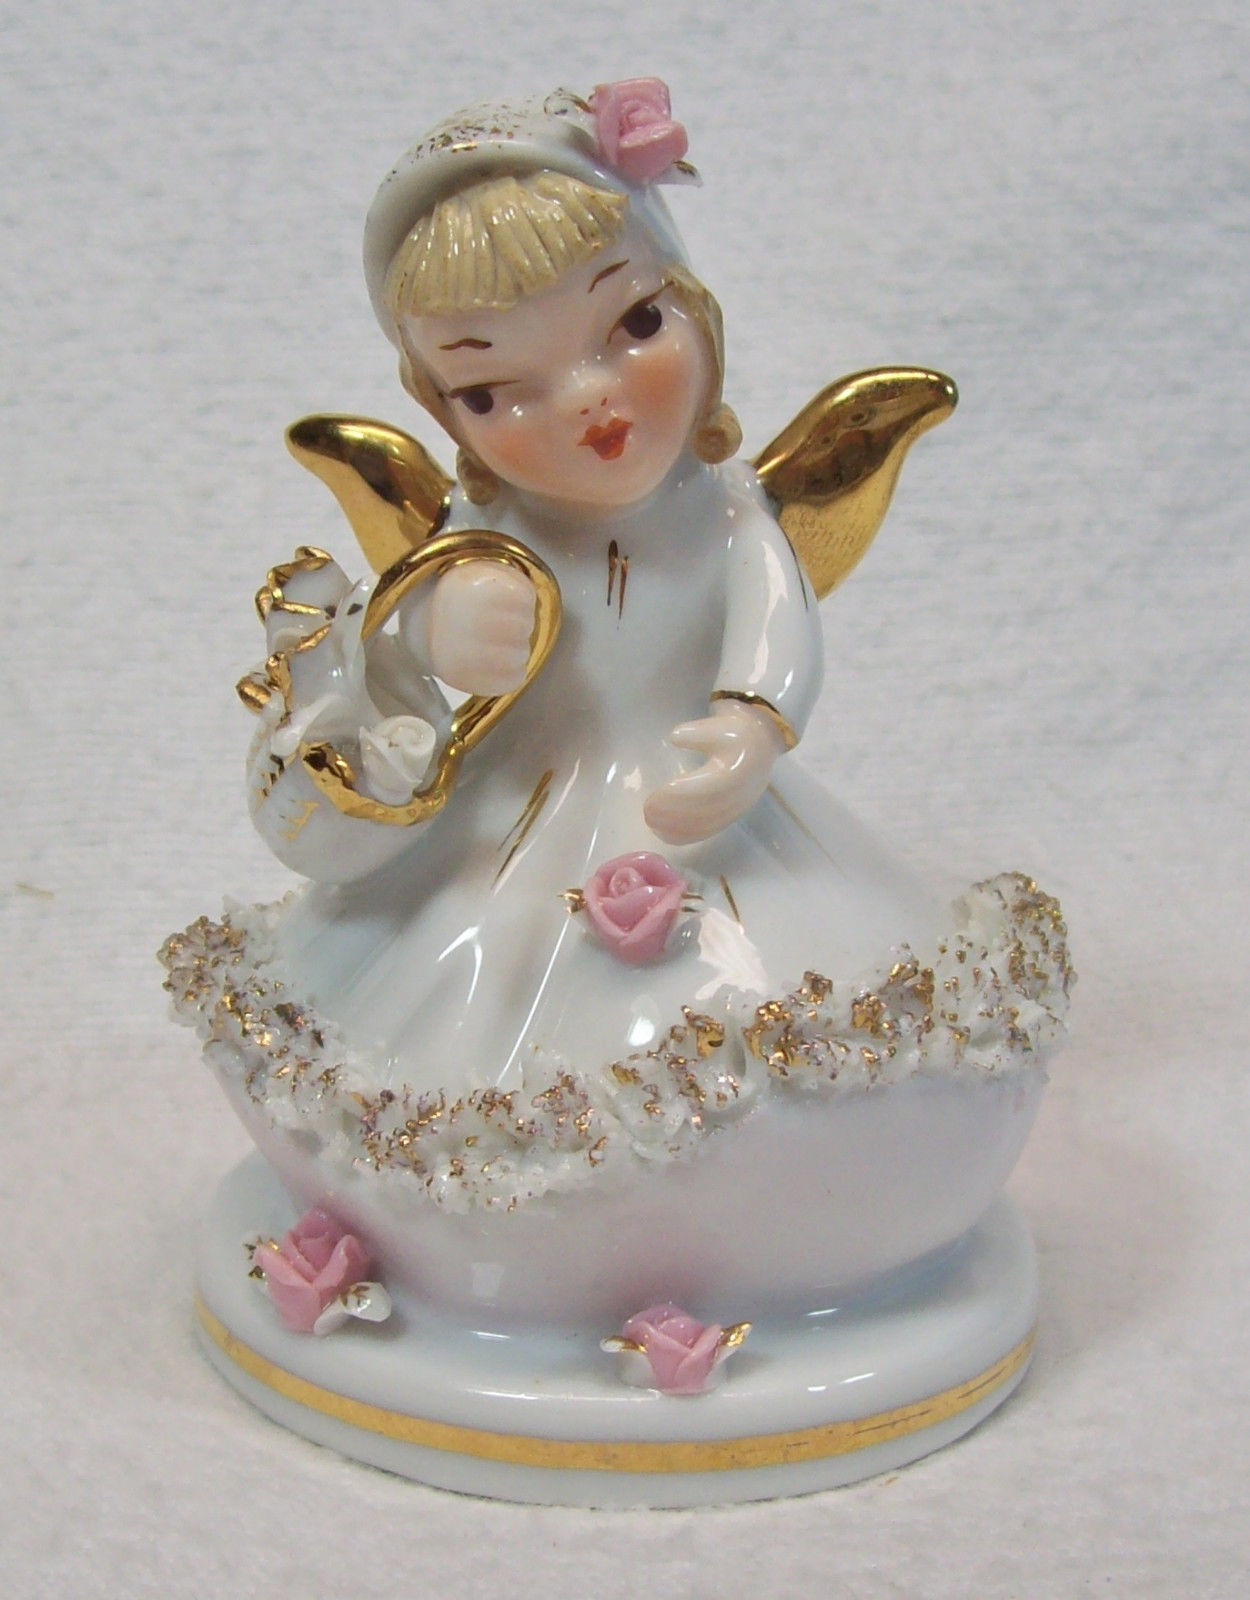 Lefton China Porcelain Angel Figurine Going and similar items